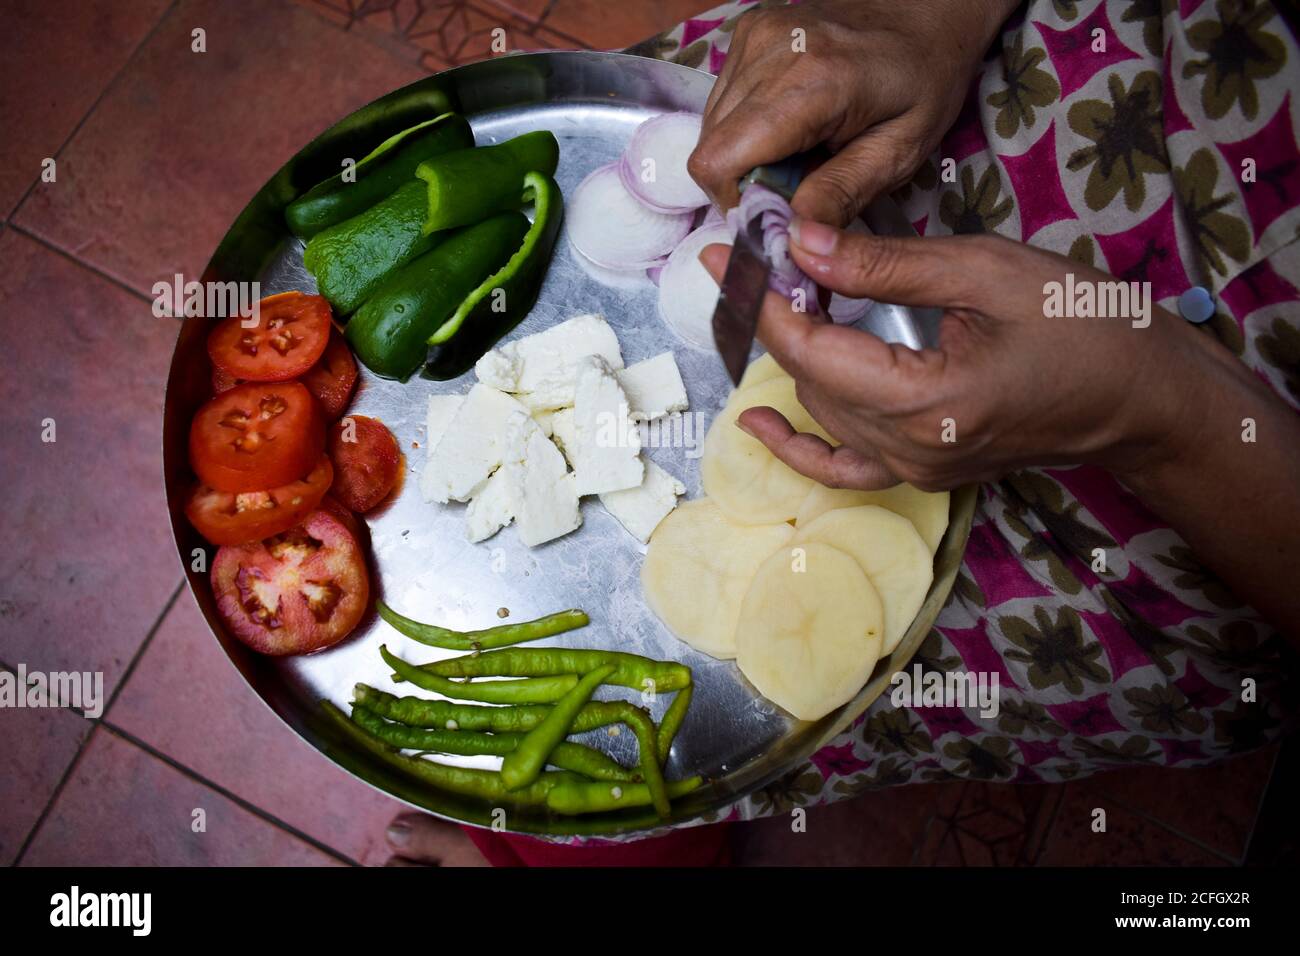 https://c8.alamy.com/comp/2CFGX2R/indian-woman-chopping-vegetables-with-both-hands-using-knife-cutting-indian-vegetables-in-stainless-steel-thaali-everyday-household-chores-2CFGX2R.jpg